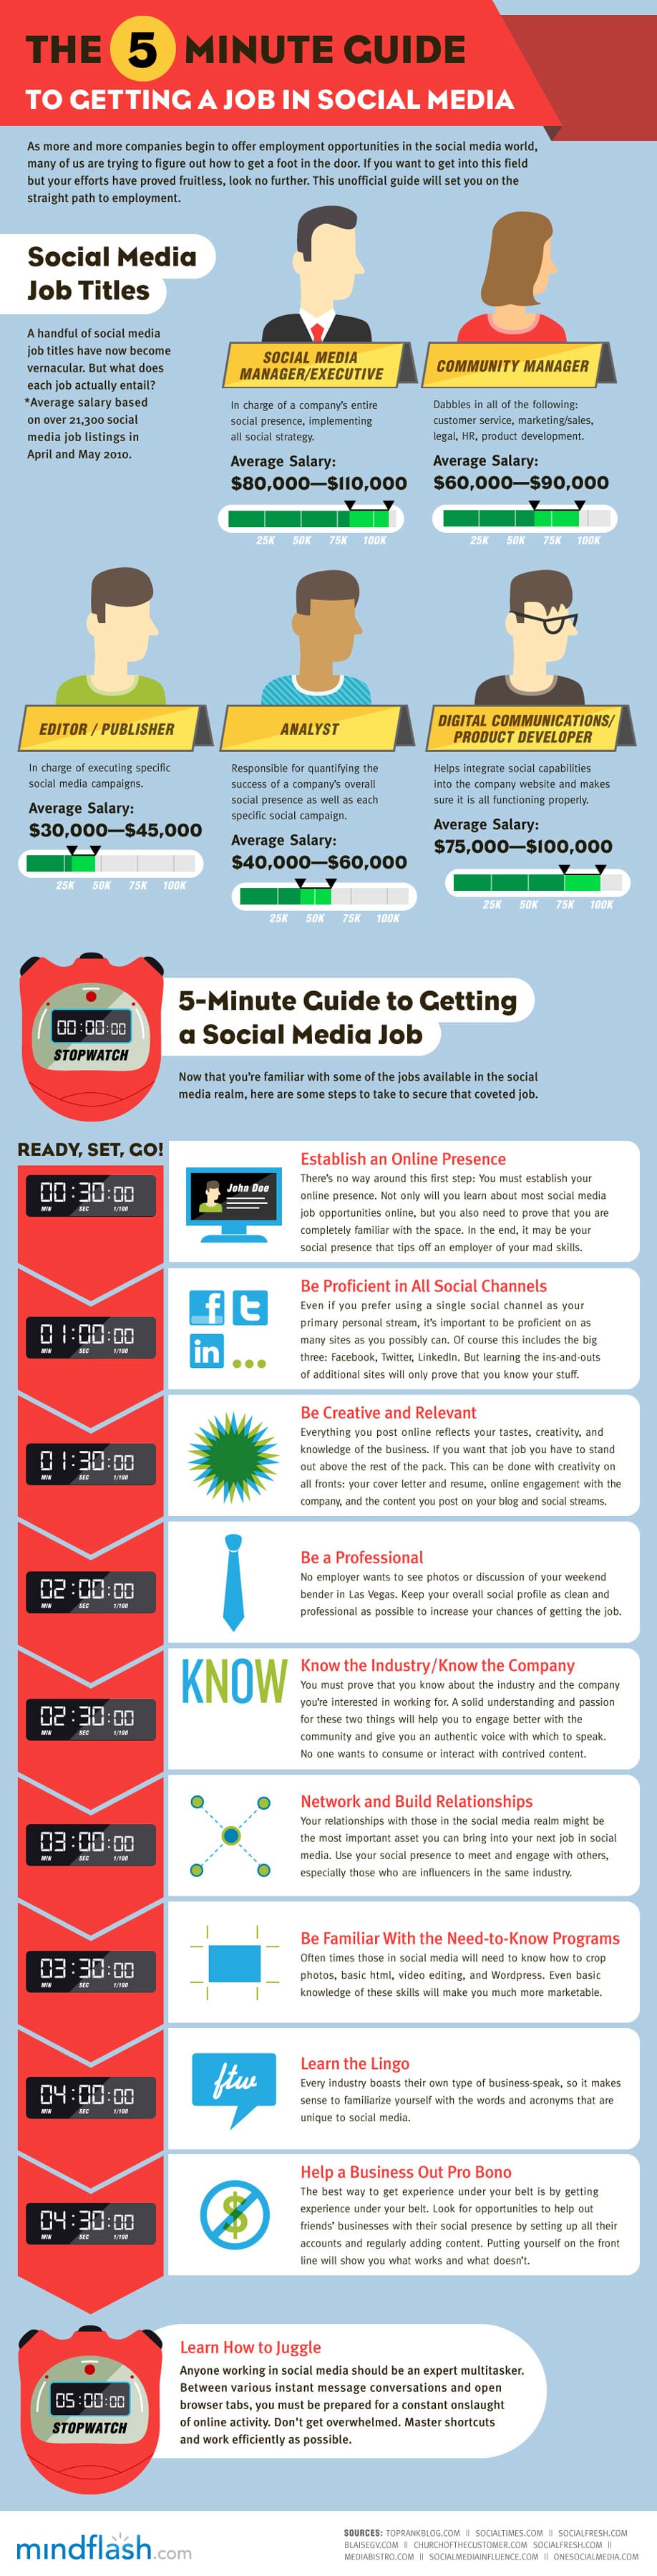 5 Minute Guide To Scoring A Job In Social Media [Infographic]